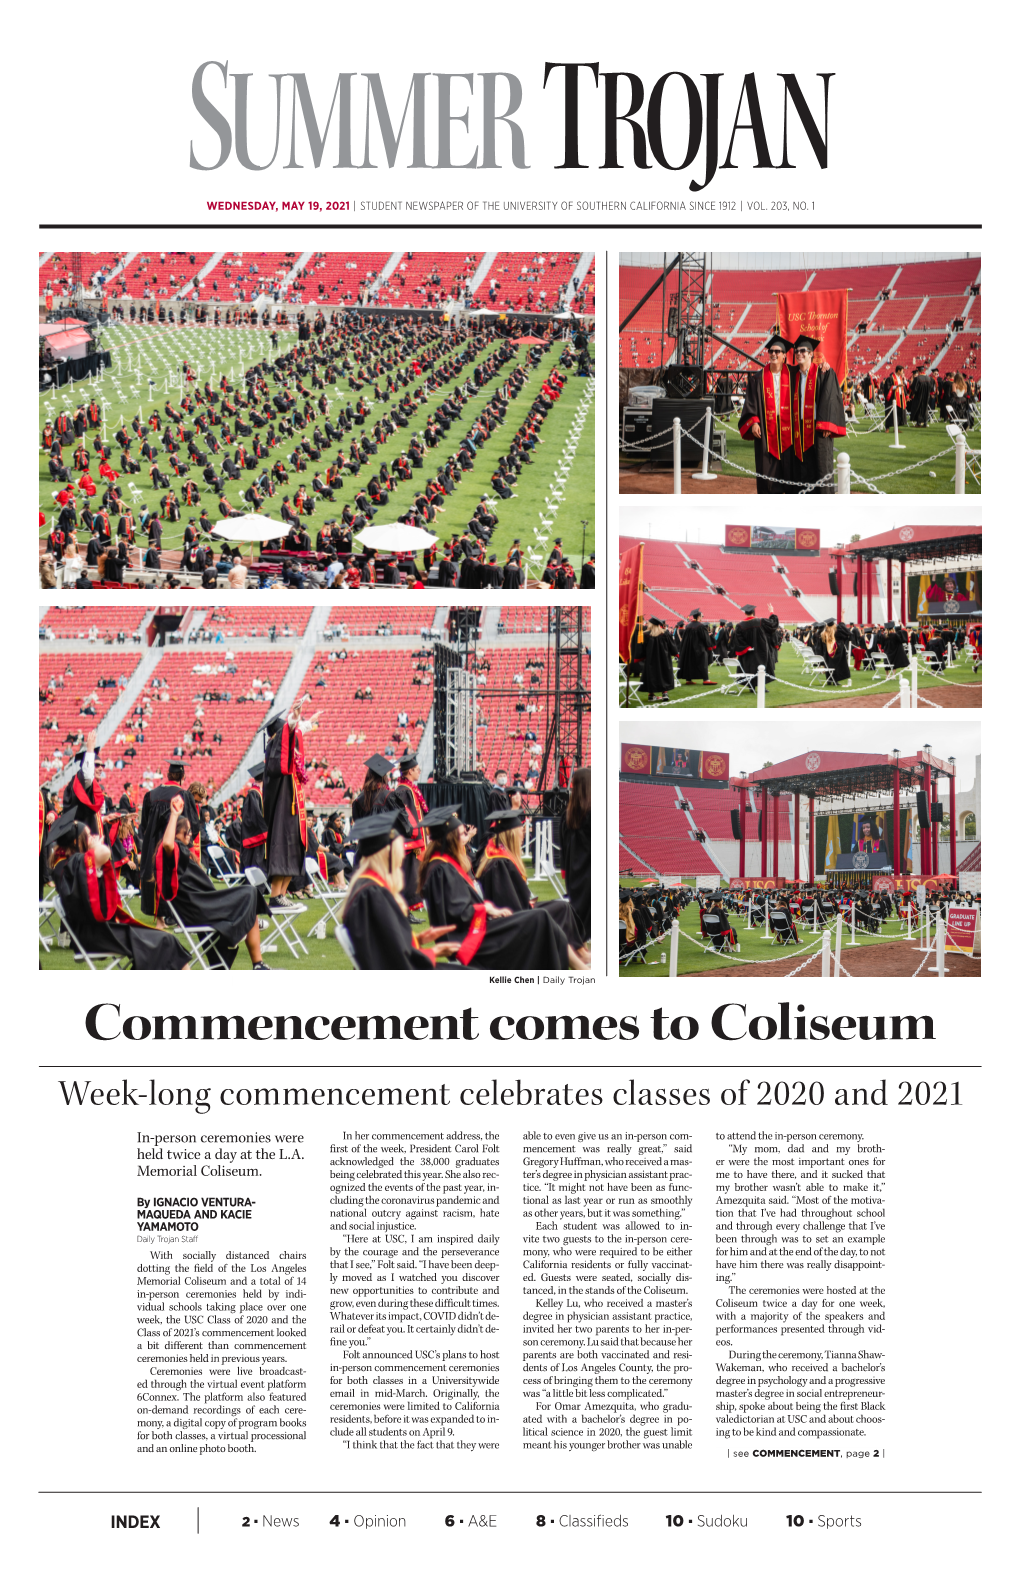 Commencement Comes to Coliseum Week-Long Commencement Celebrates Classes of 2020 and 2021